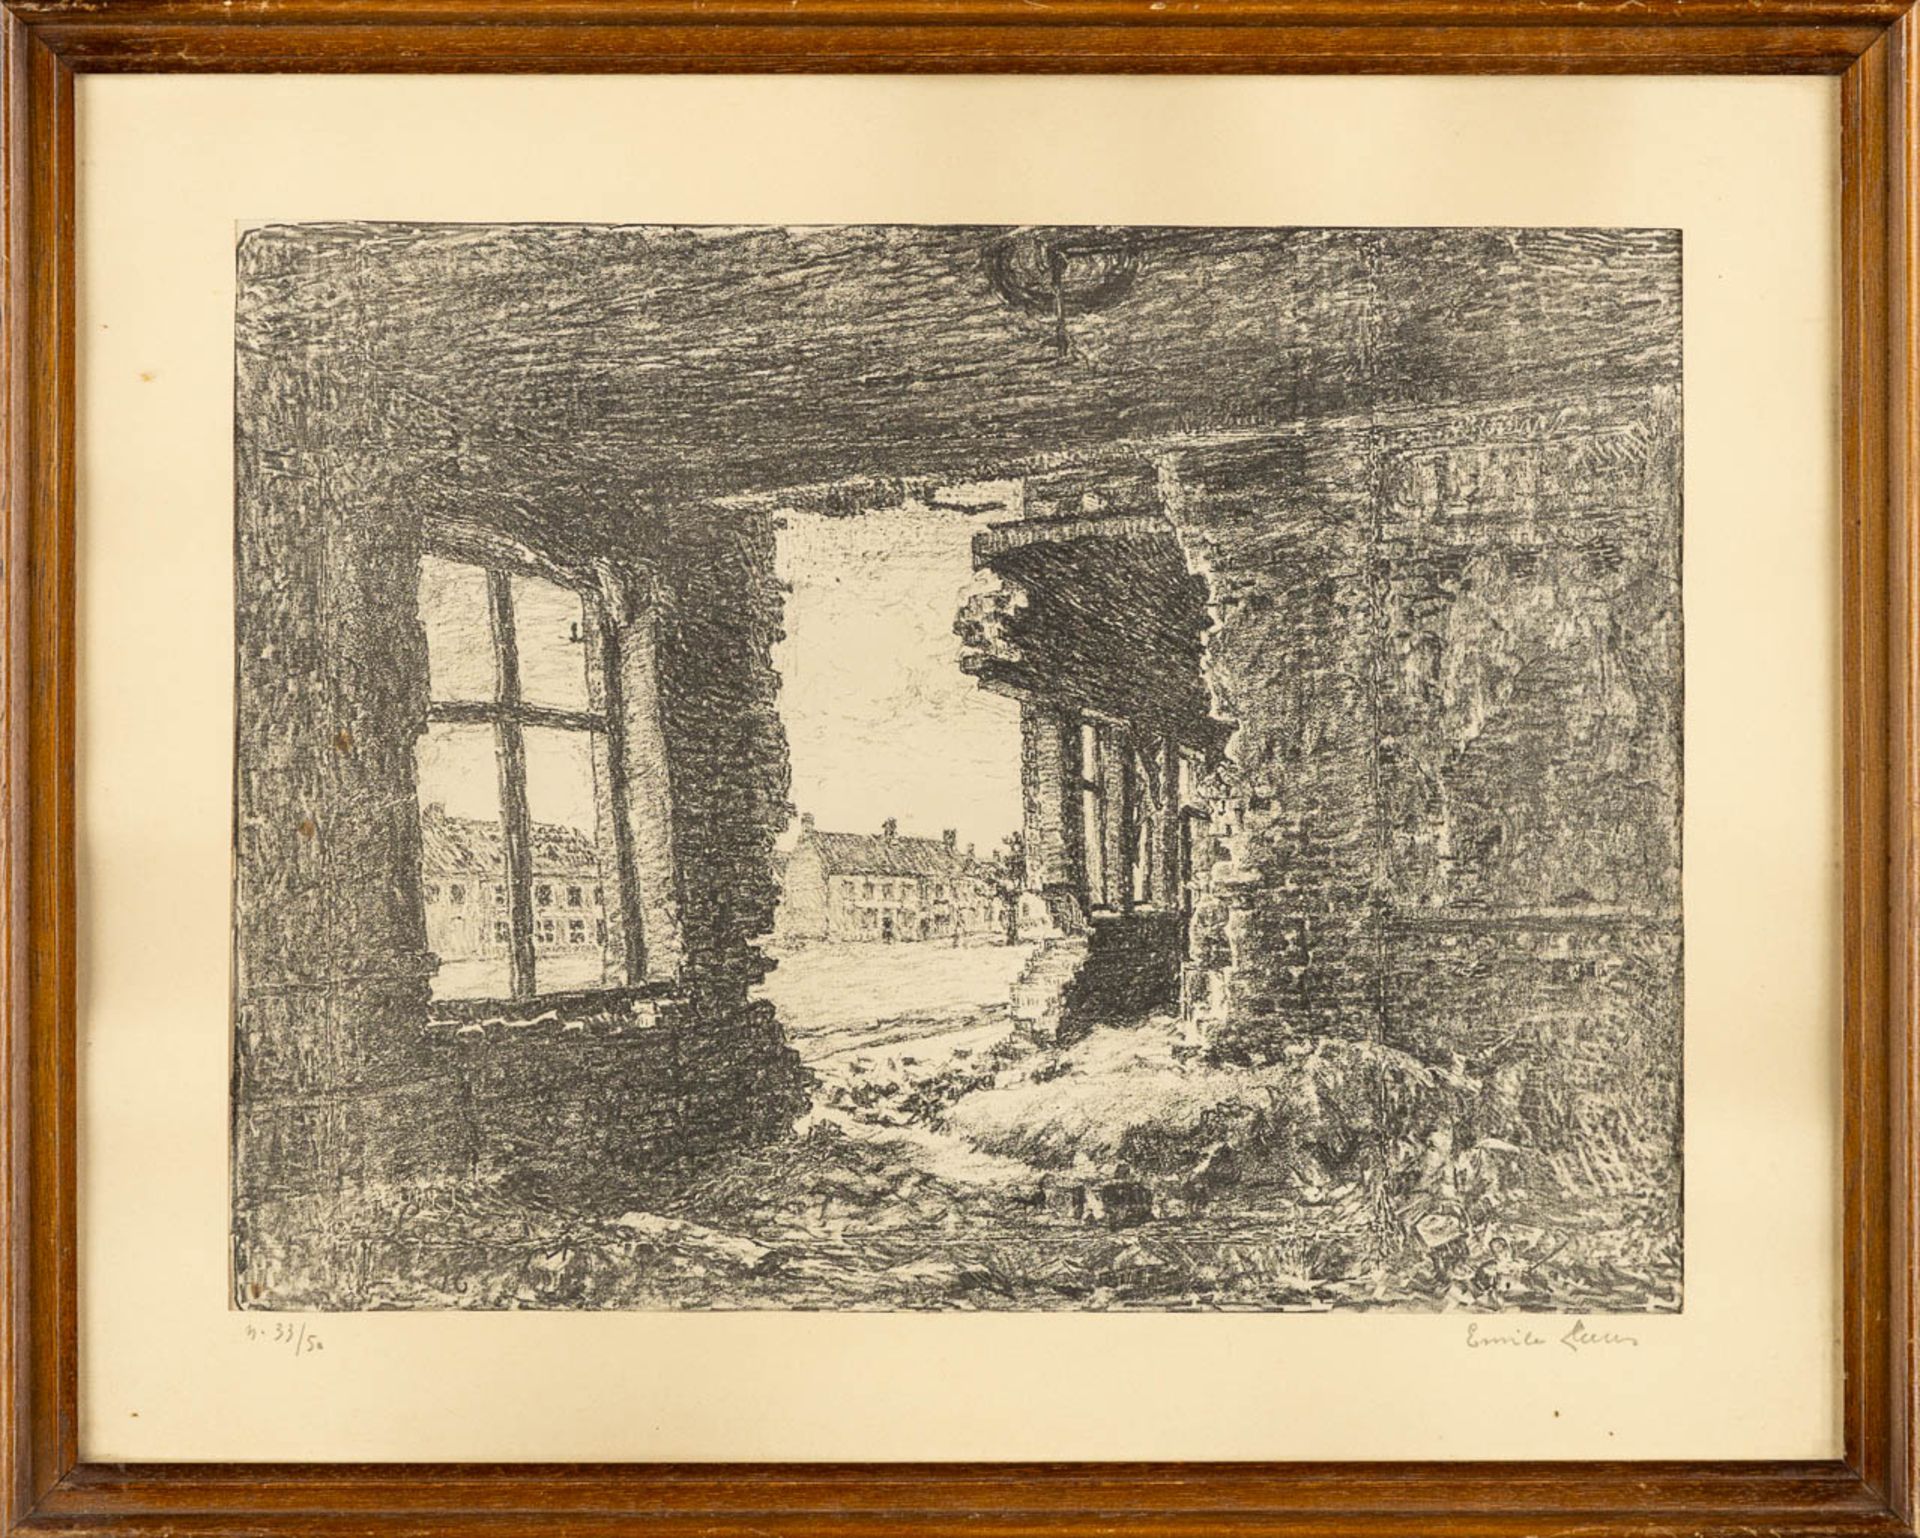 Emile CLAUS (1849-1924) 'Loo Sept, 1916' Two Lithographs. (W:32 x H:46 cm) - Image 7 of 11